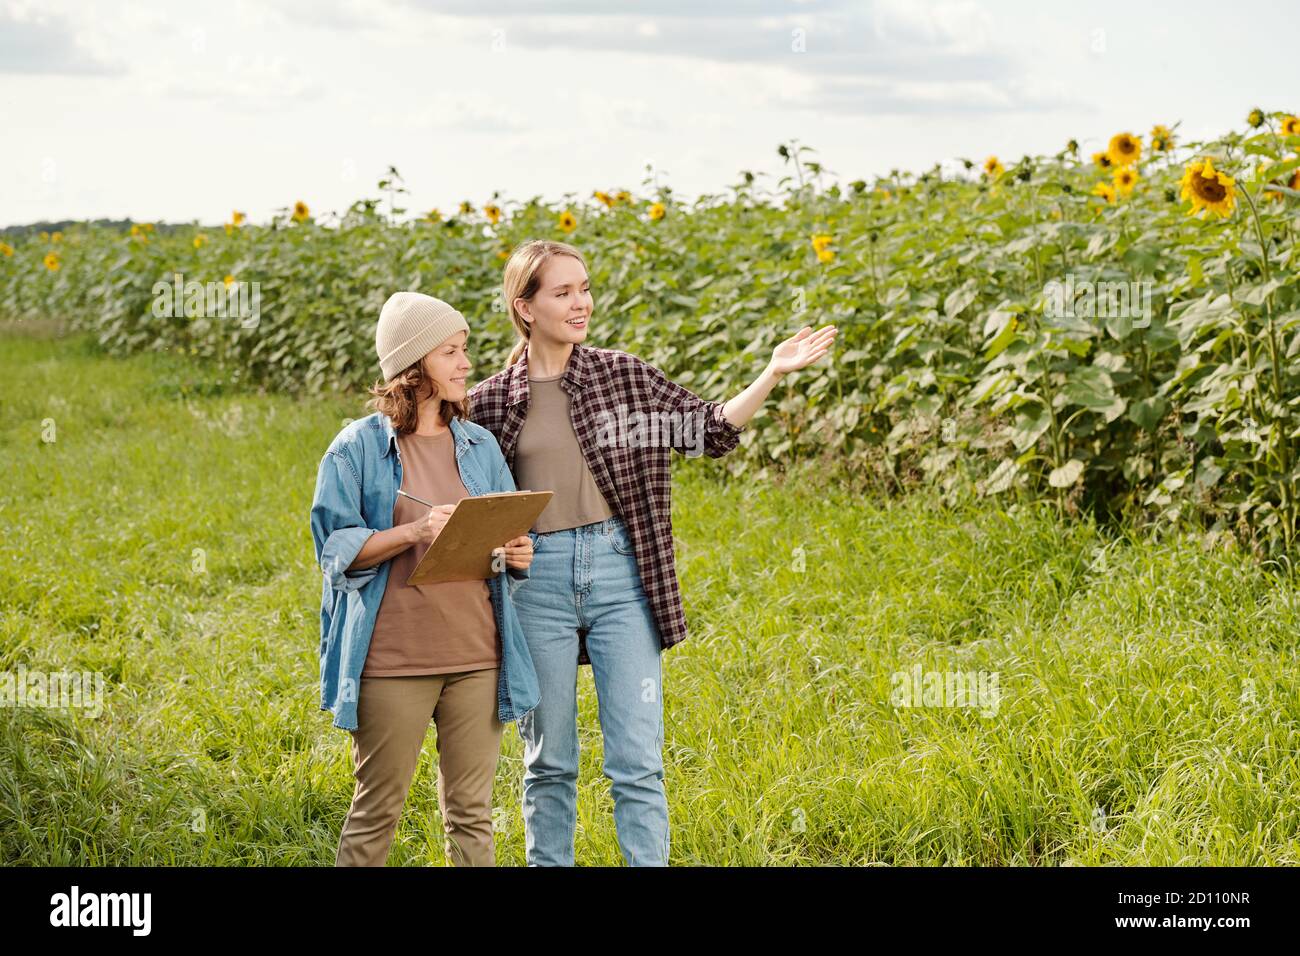 Two cheerful farmers in workwear looking at sunflower field in front of camera Stock Photo